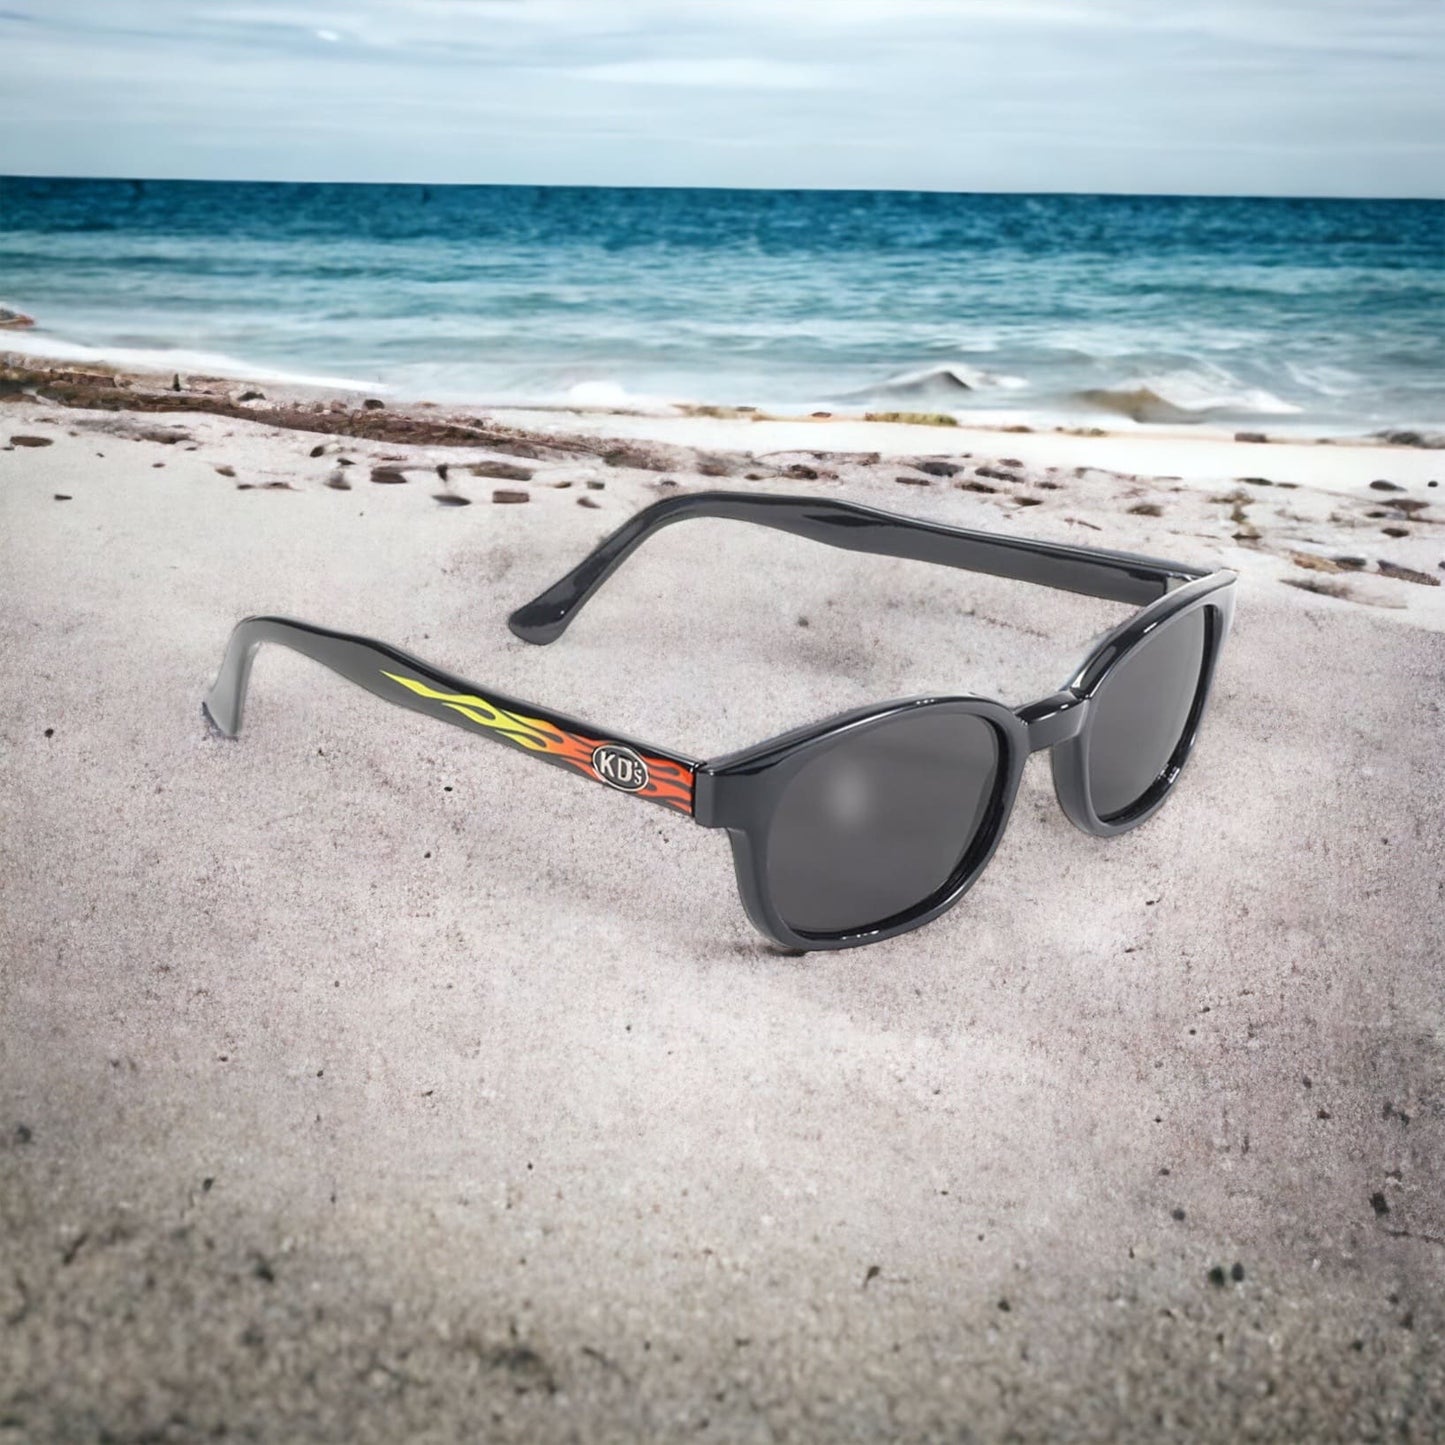 The KD's 3010 sunglasses with grey polycarbonate lenses and a frame with a yellow and orange gradient flame pattern exposed on the sand of a beach.